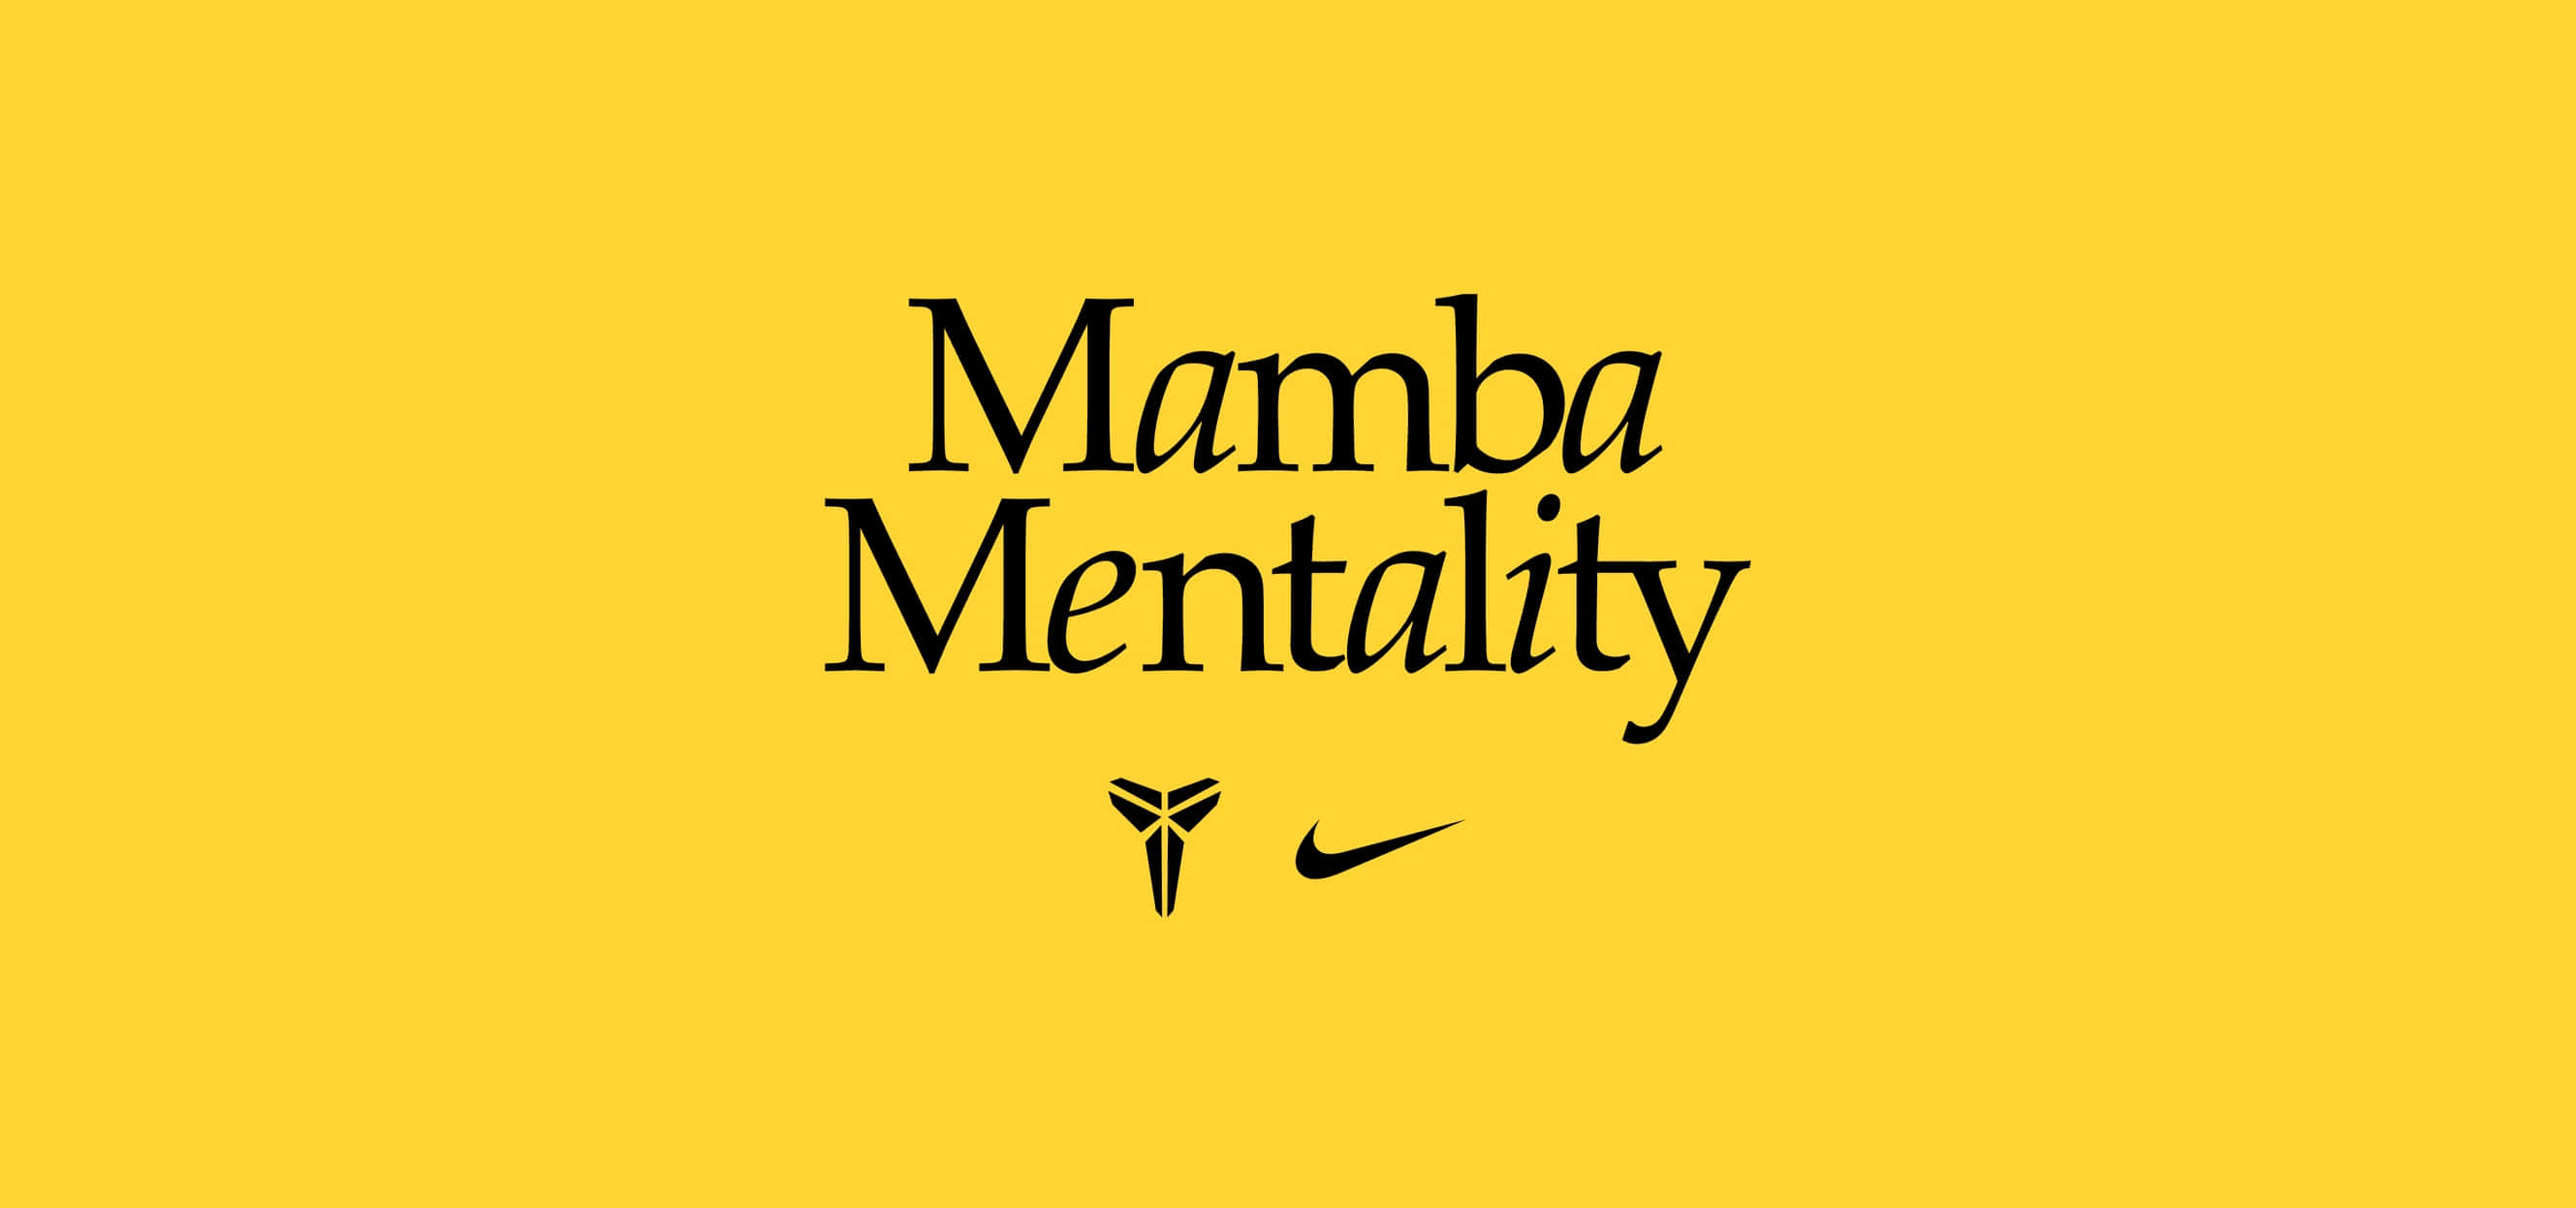 “The Mamba Mentality is One of Optimal Performance” Wallpaper